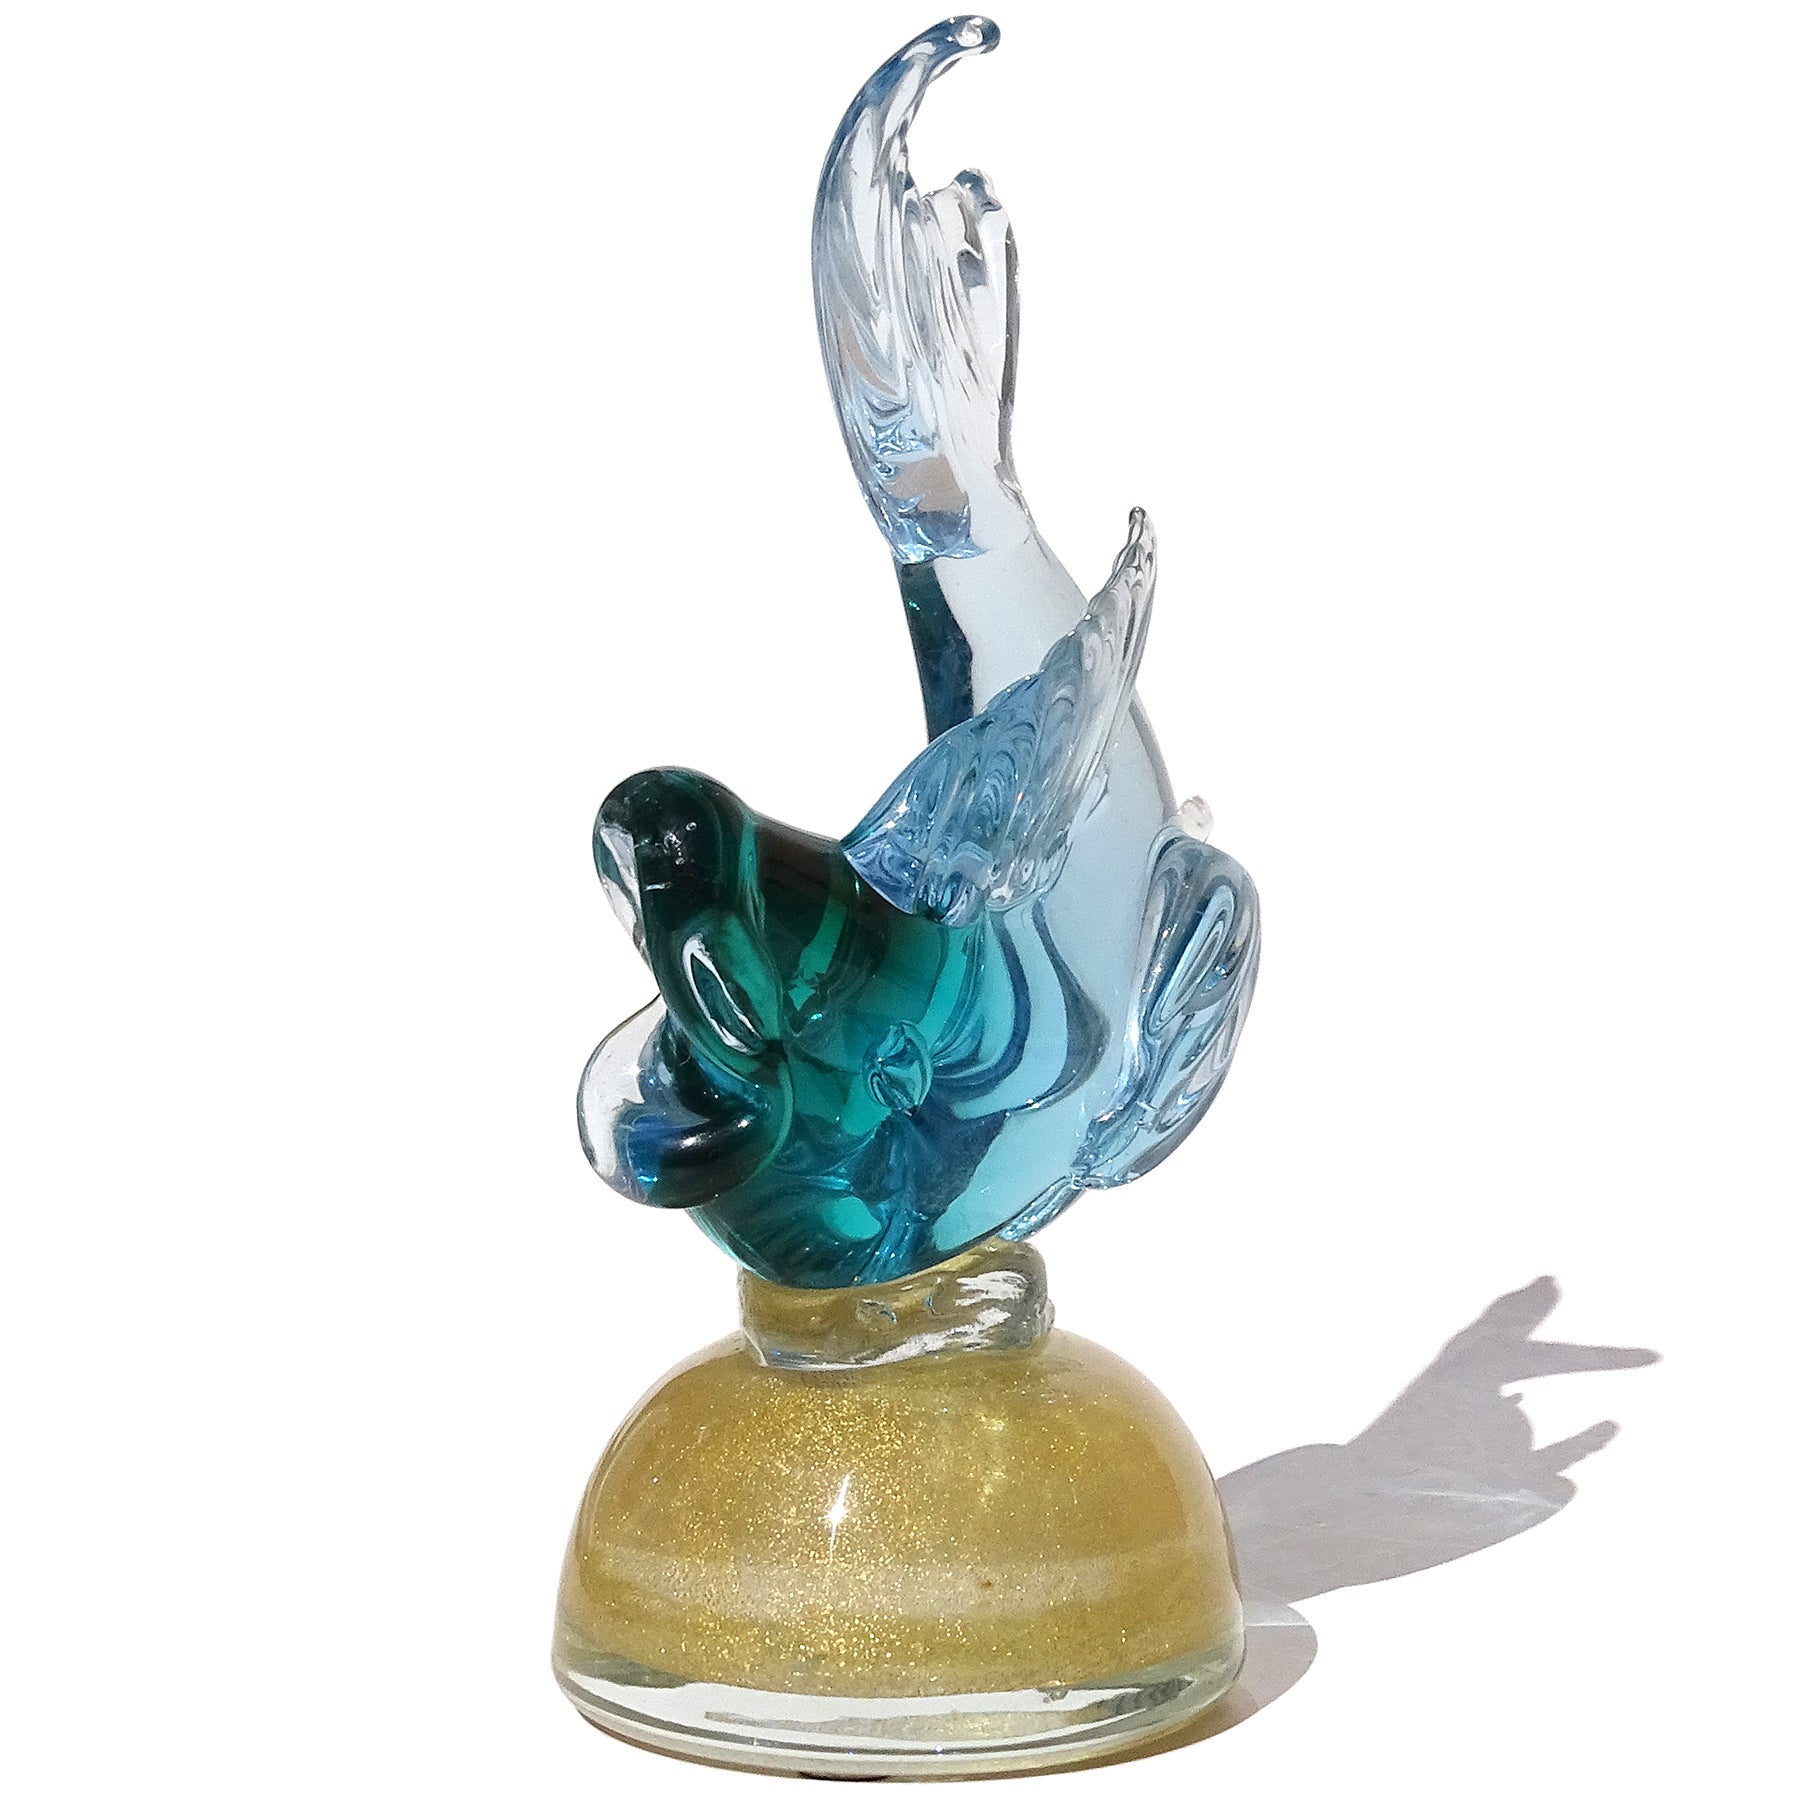 Beautiful vintage Murano hand blown Sommerso green to blue, and gold flecks Italian art glass fish sculpture on pedestal. Documented to Master glass artist and designer Alfredo Barbini, circa 1950-60s. Published in his catalog. The green color is